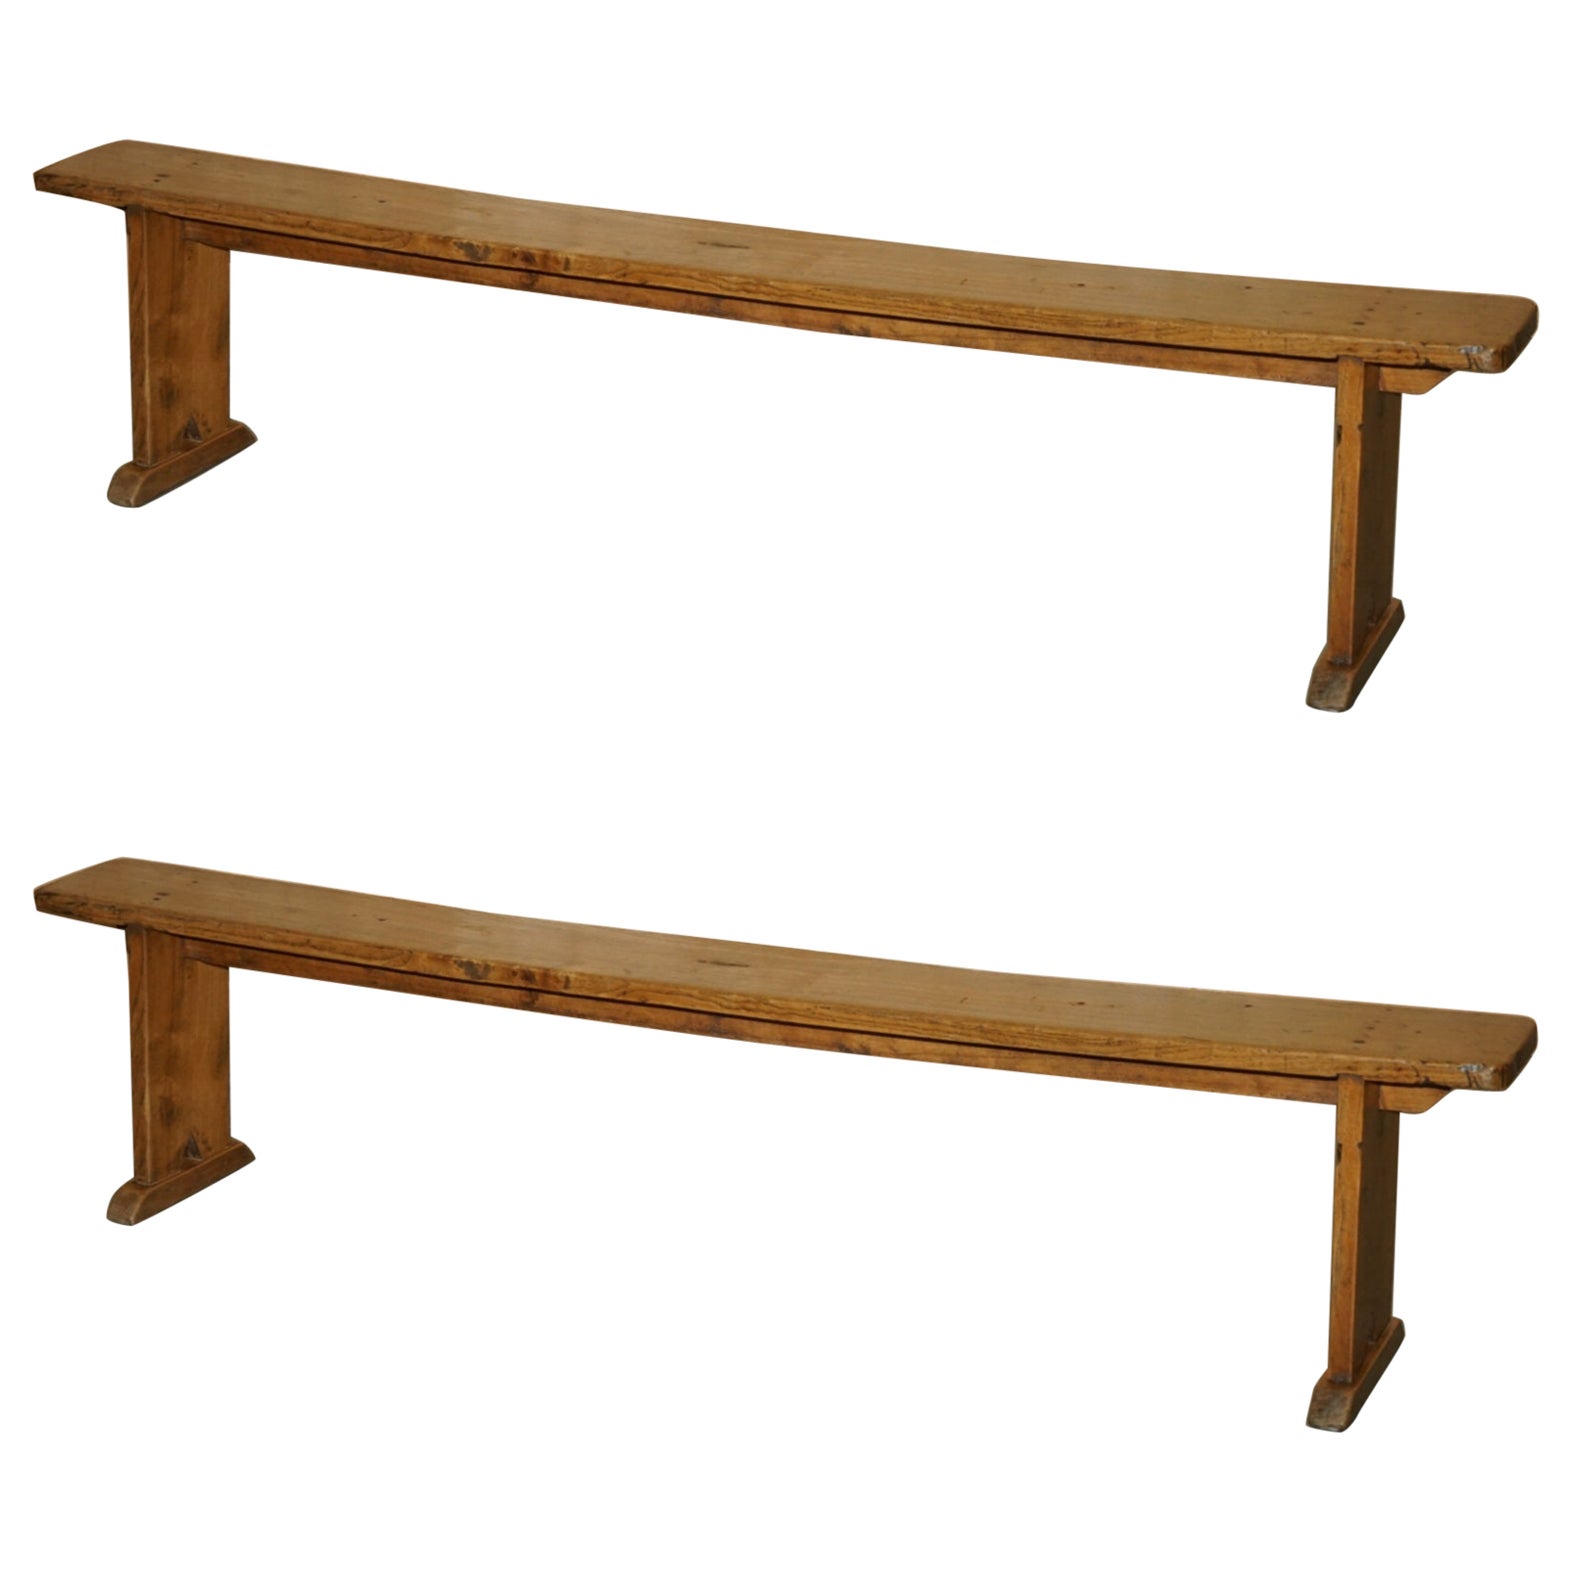 PAIR OF ViCTORIAN ENGLISH OAK ANTIQUE LIGHTLY BURRED DINING TABLE BENCH PEW SEAT For Sale